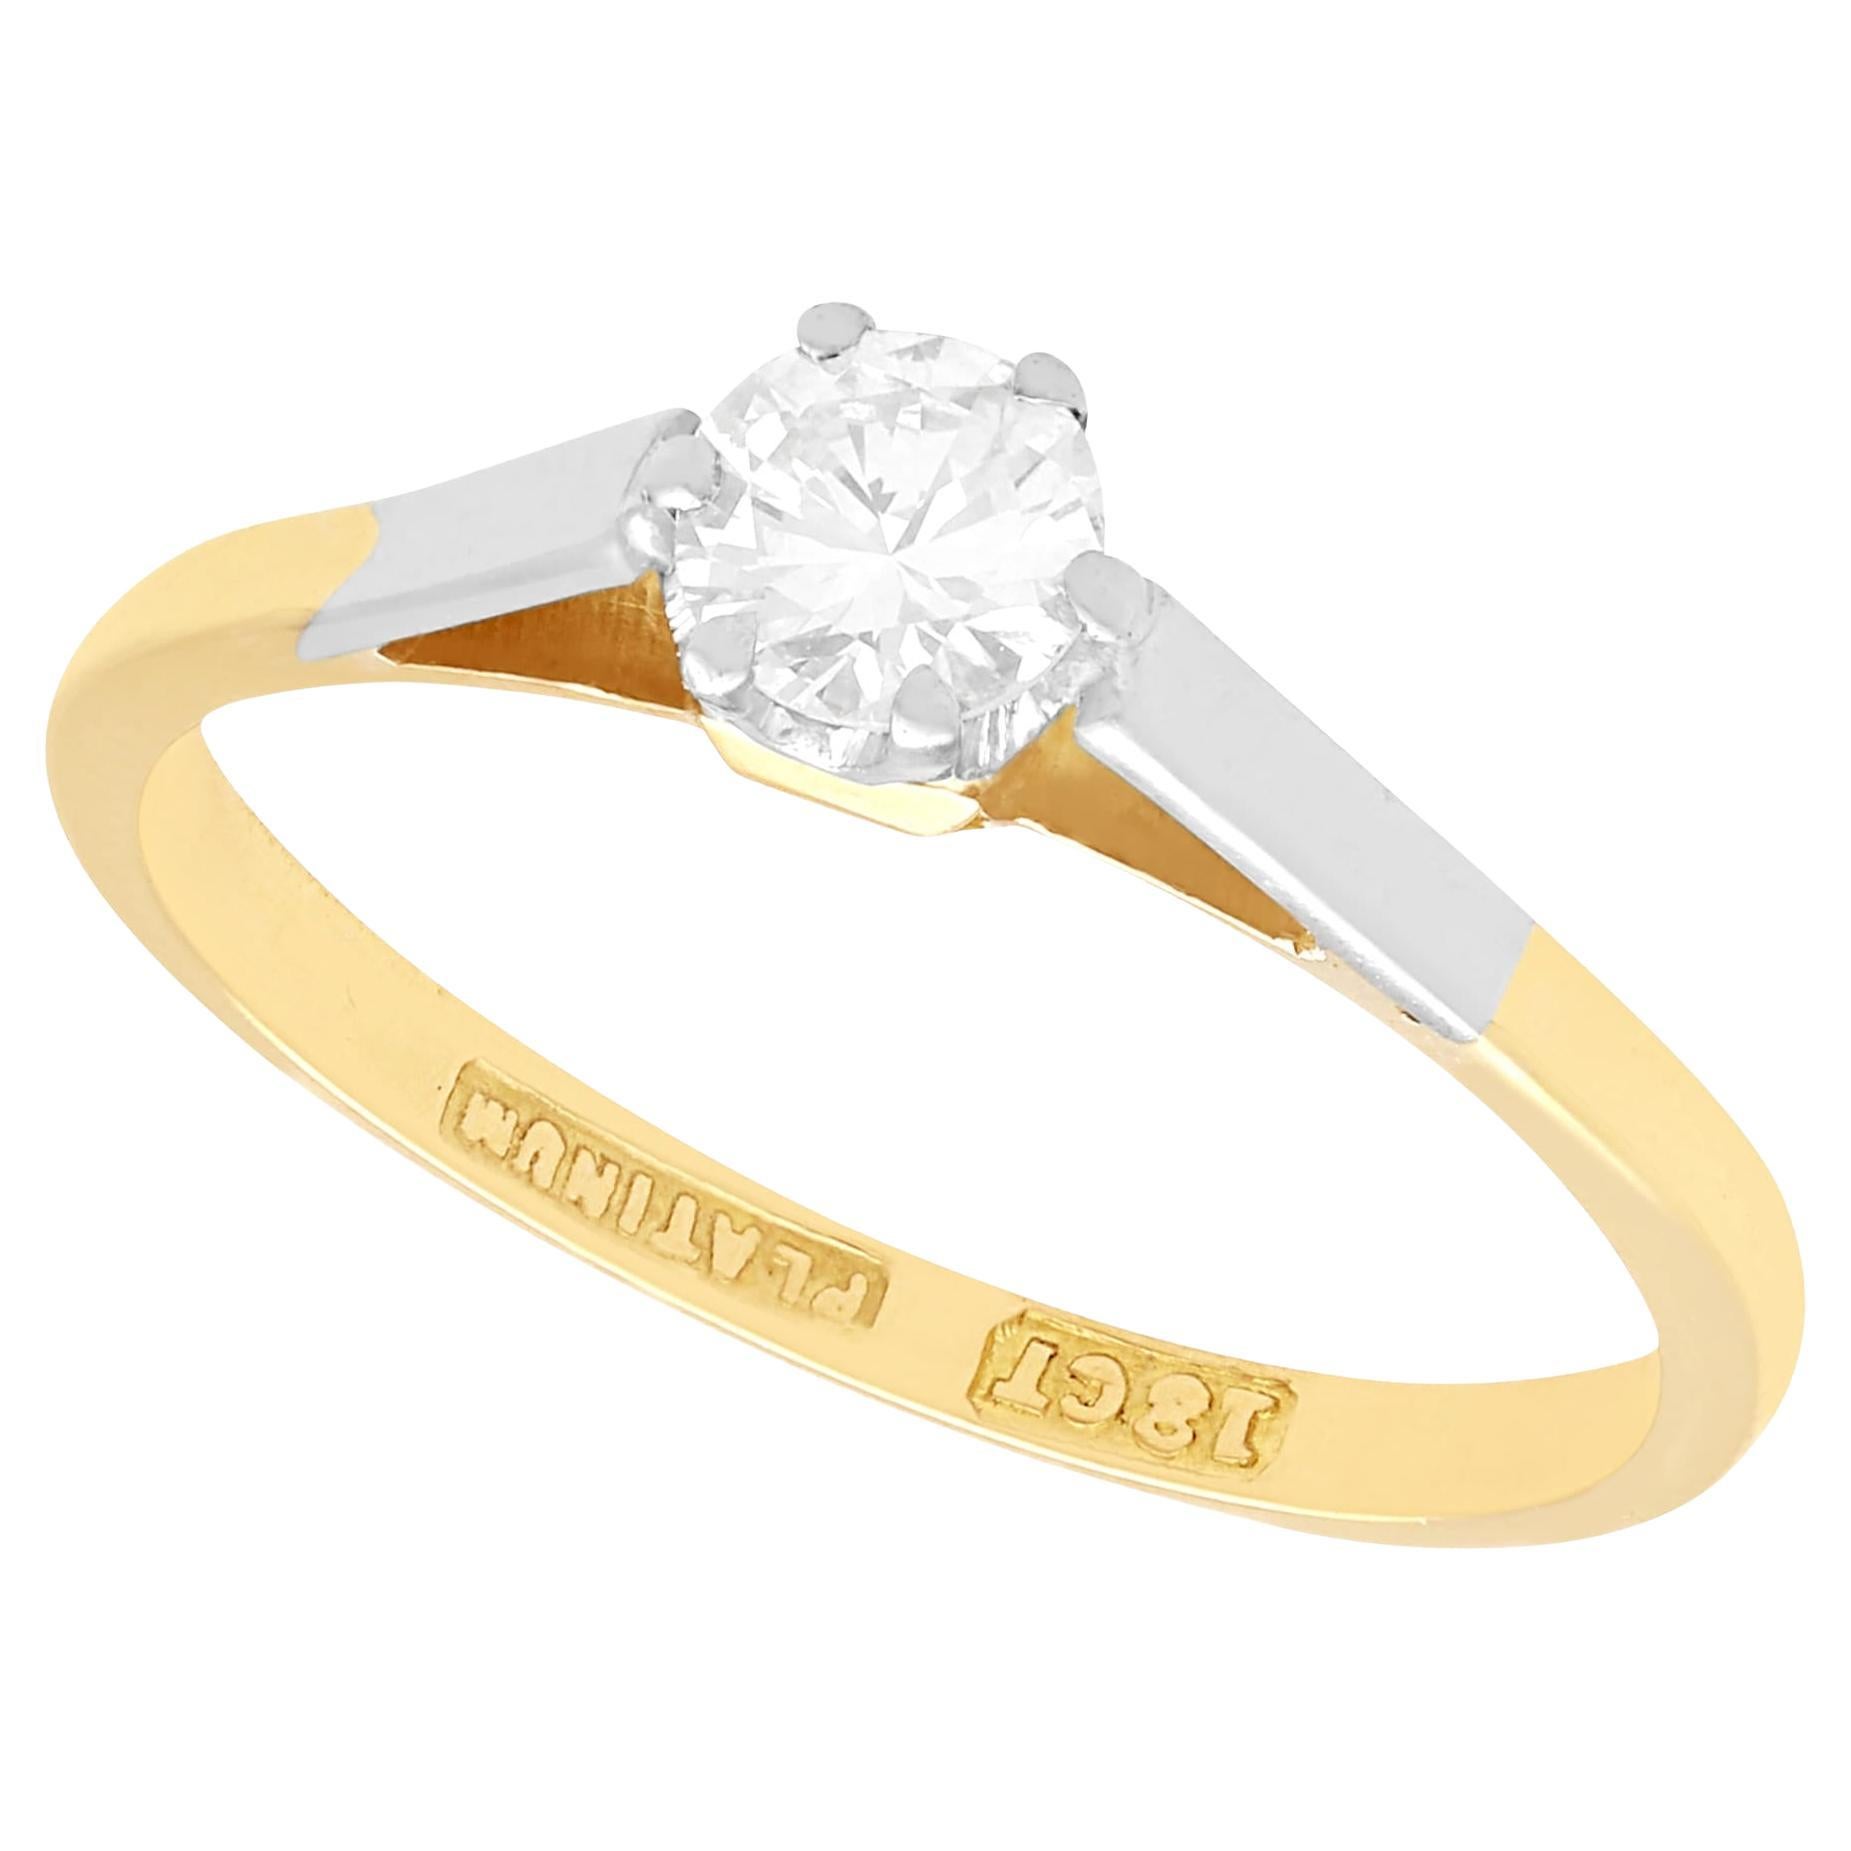 Vintage Diamond and Yellow Gold Solitaire Engagement Ring, Circa 1950